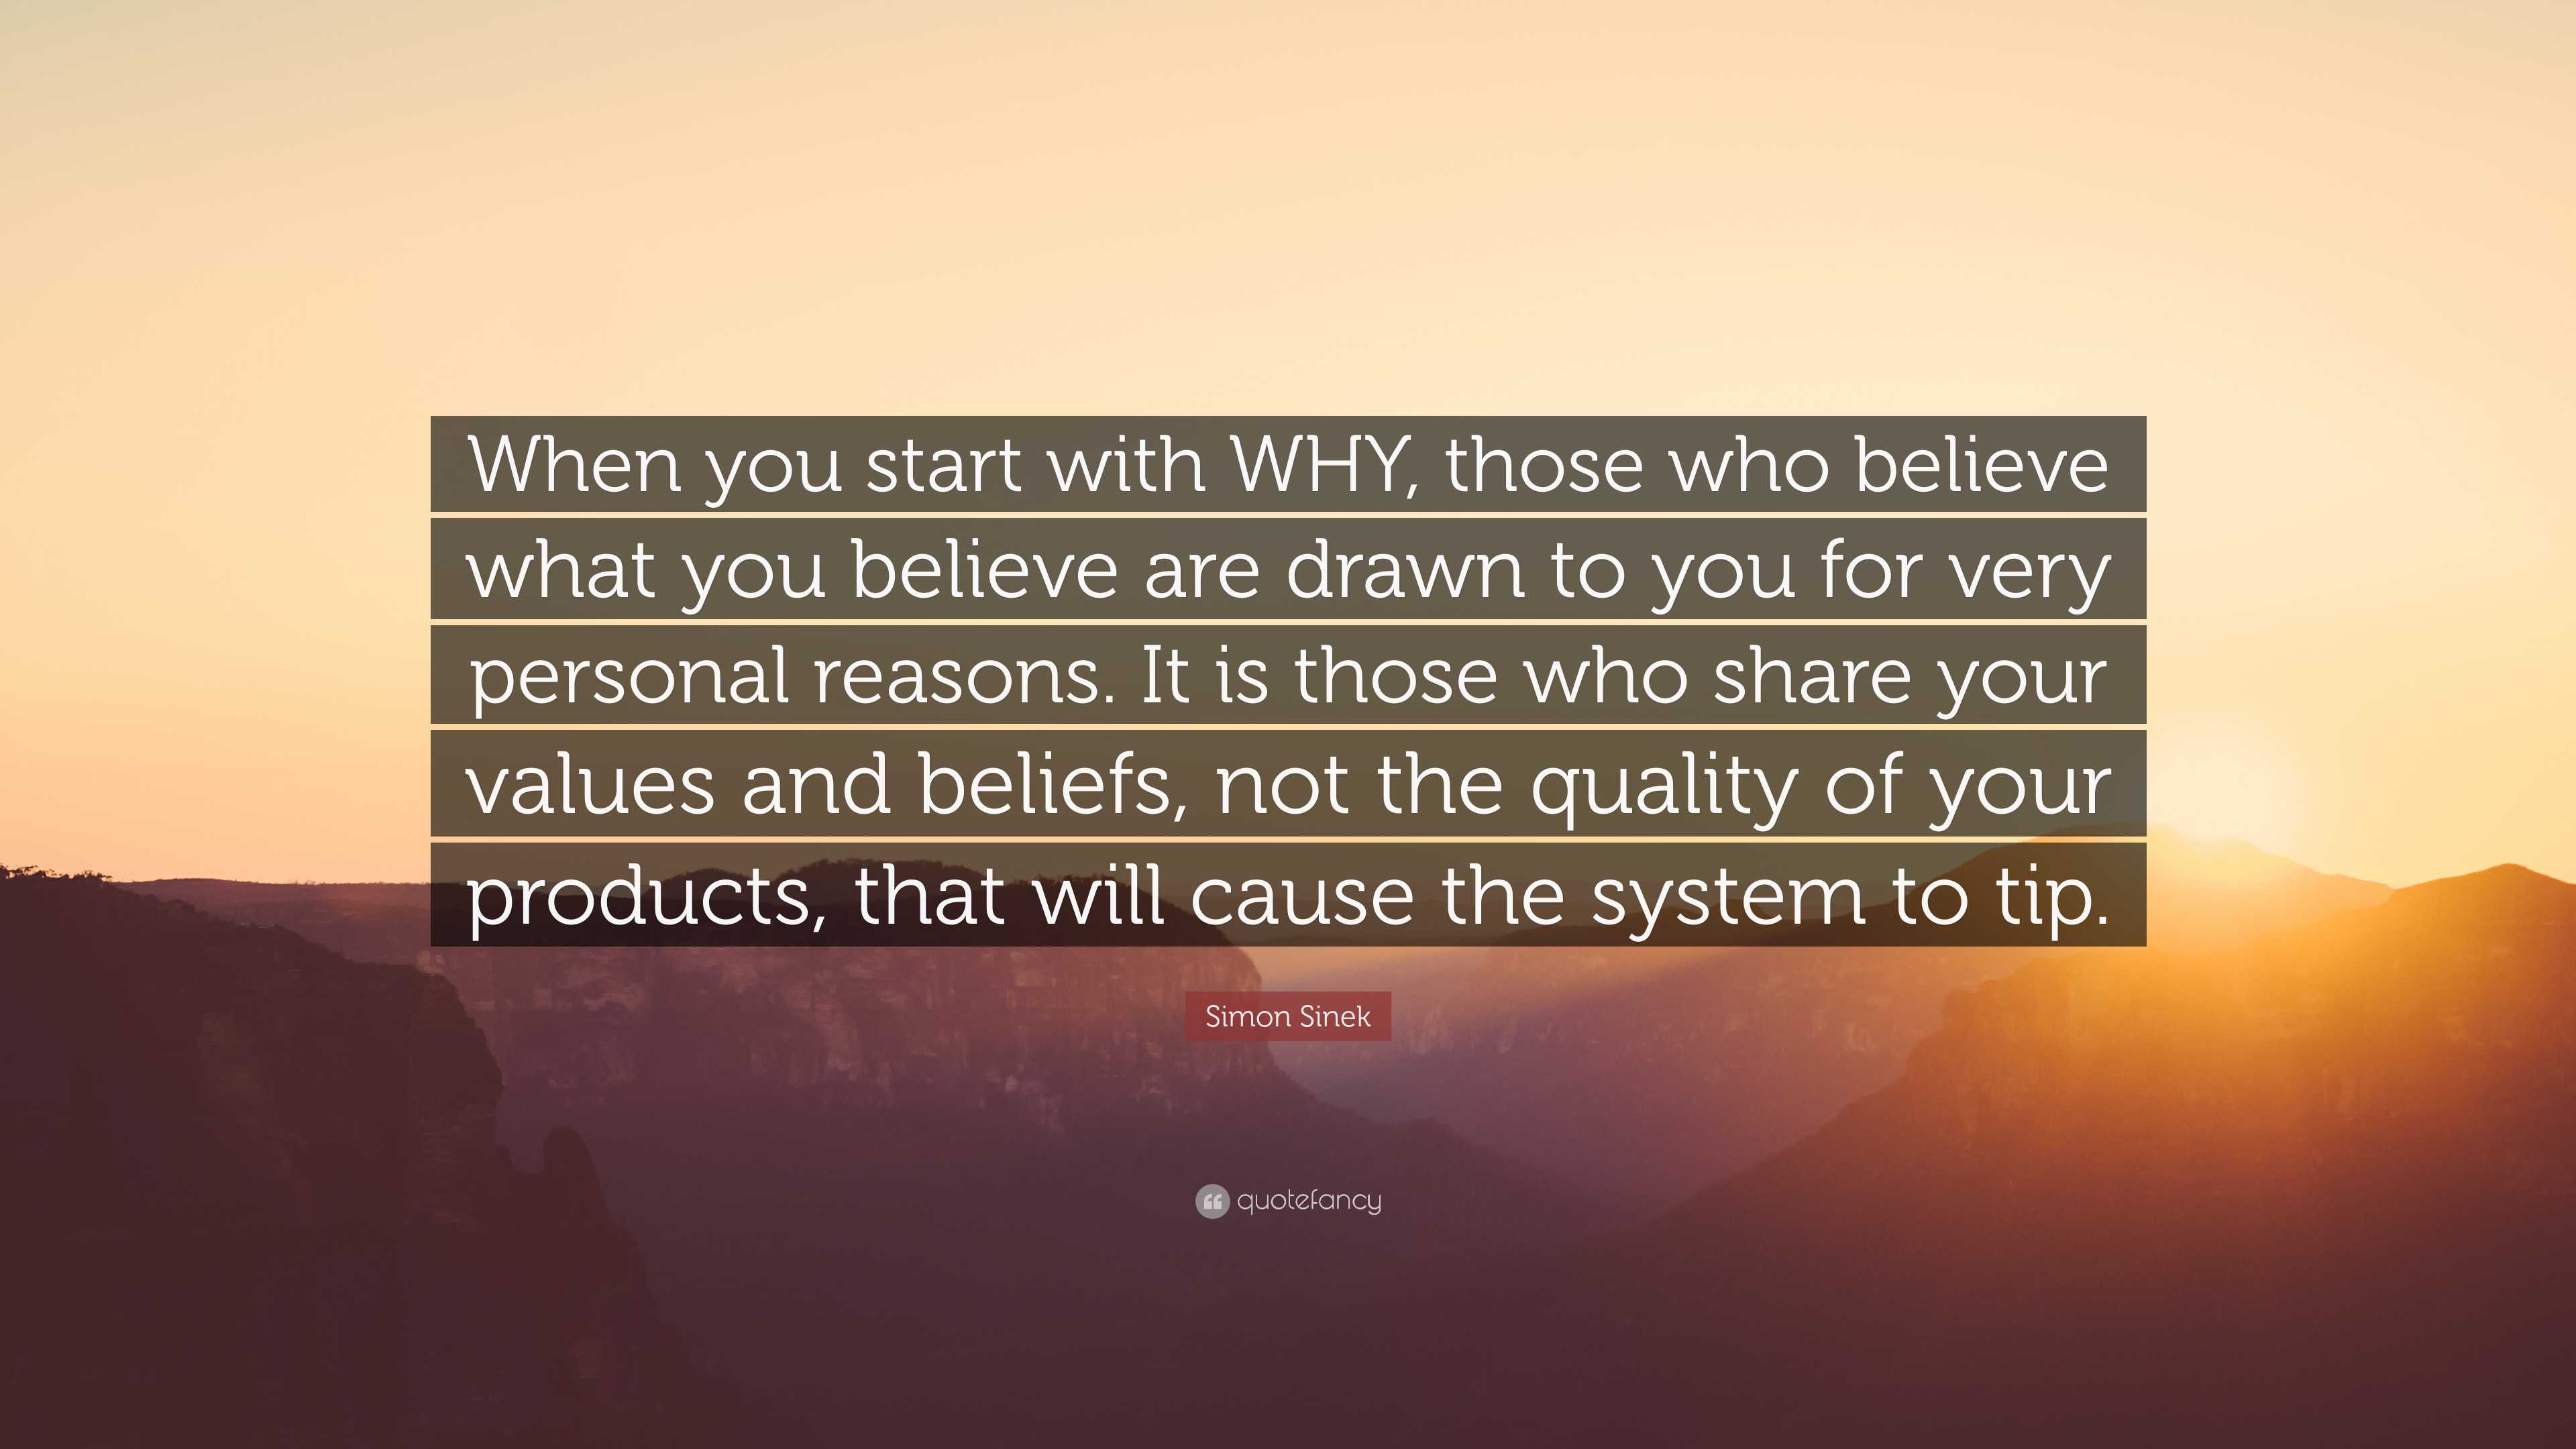 Simon Sinek Quote: “When you start with WHY, those who believe what you  believe are drawn to you for very personal reasons. It is those who ”